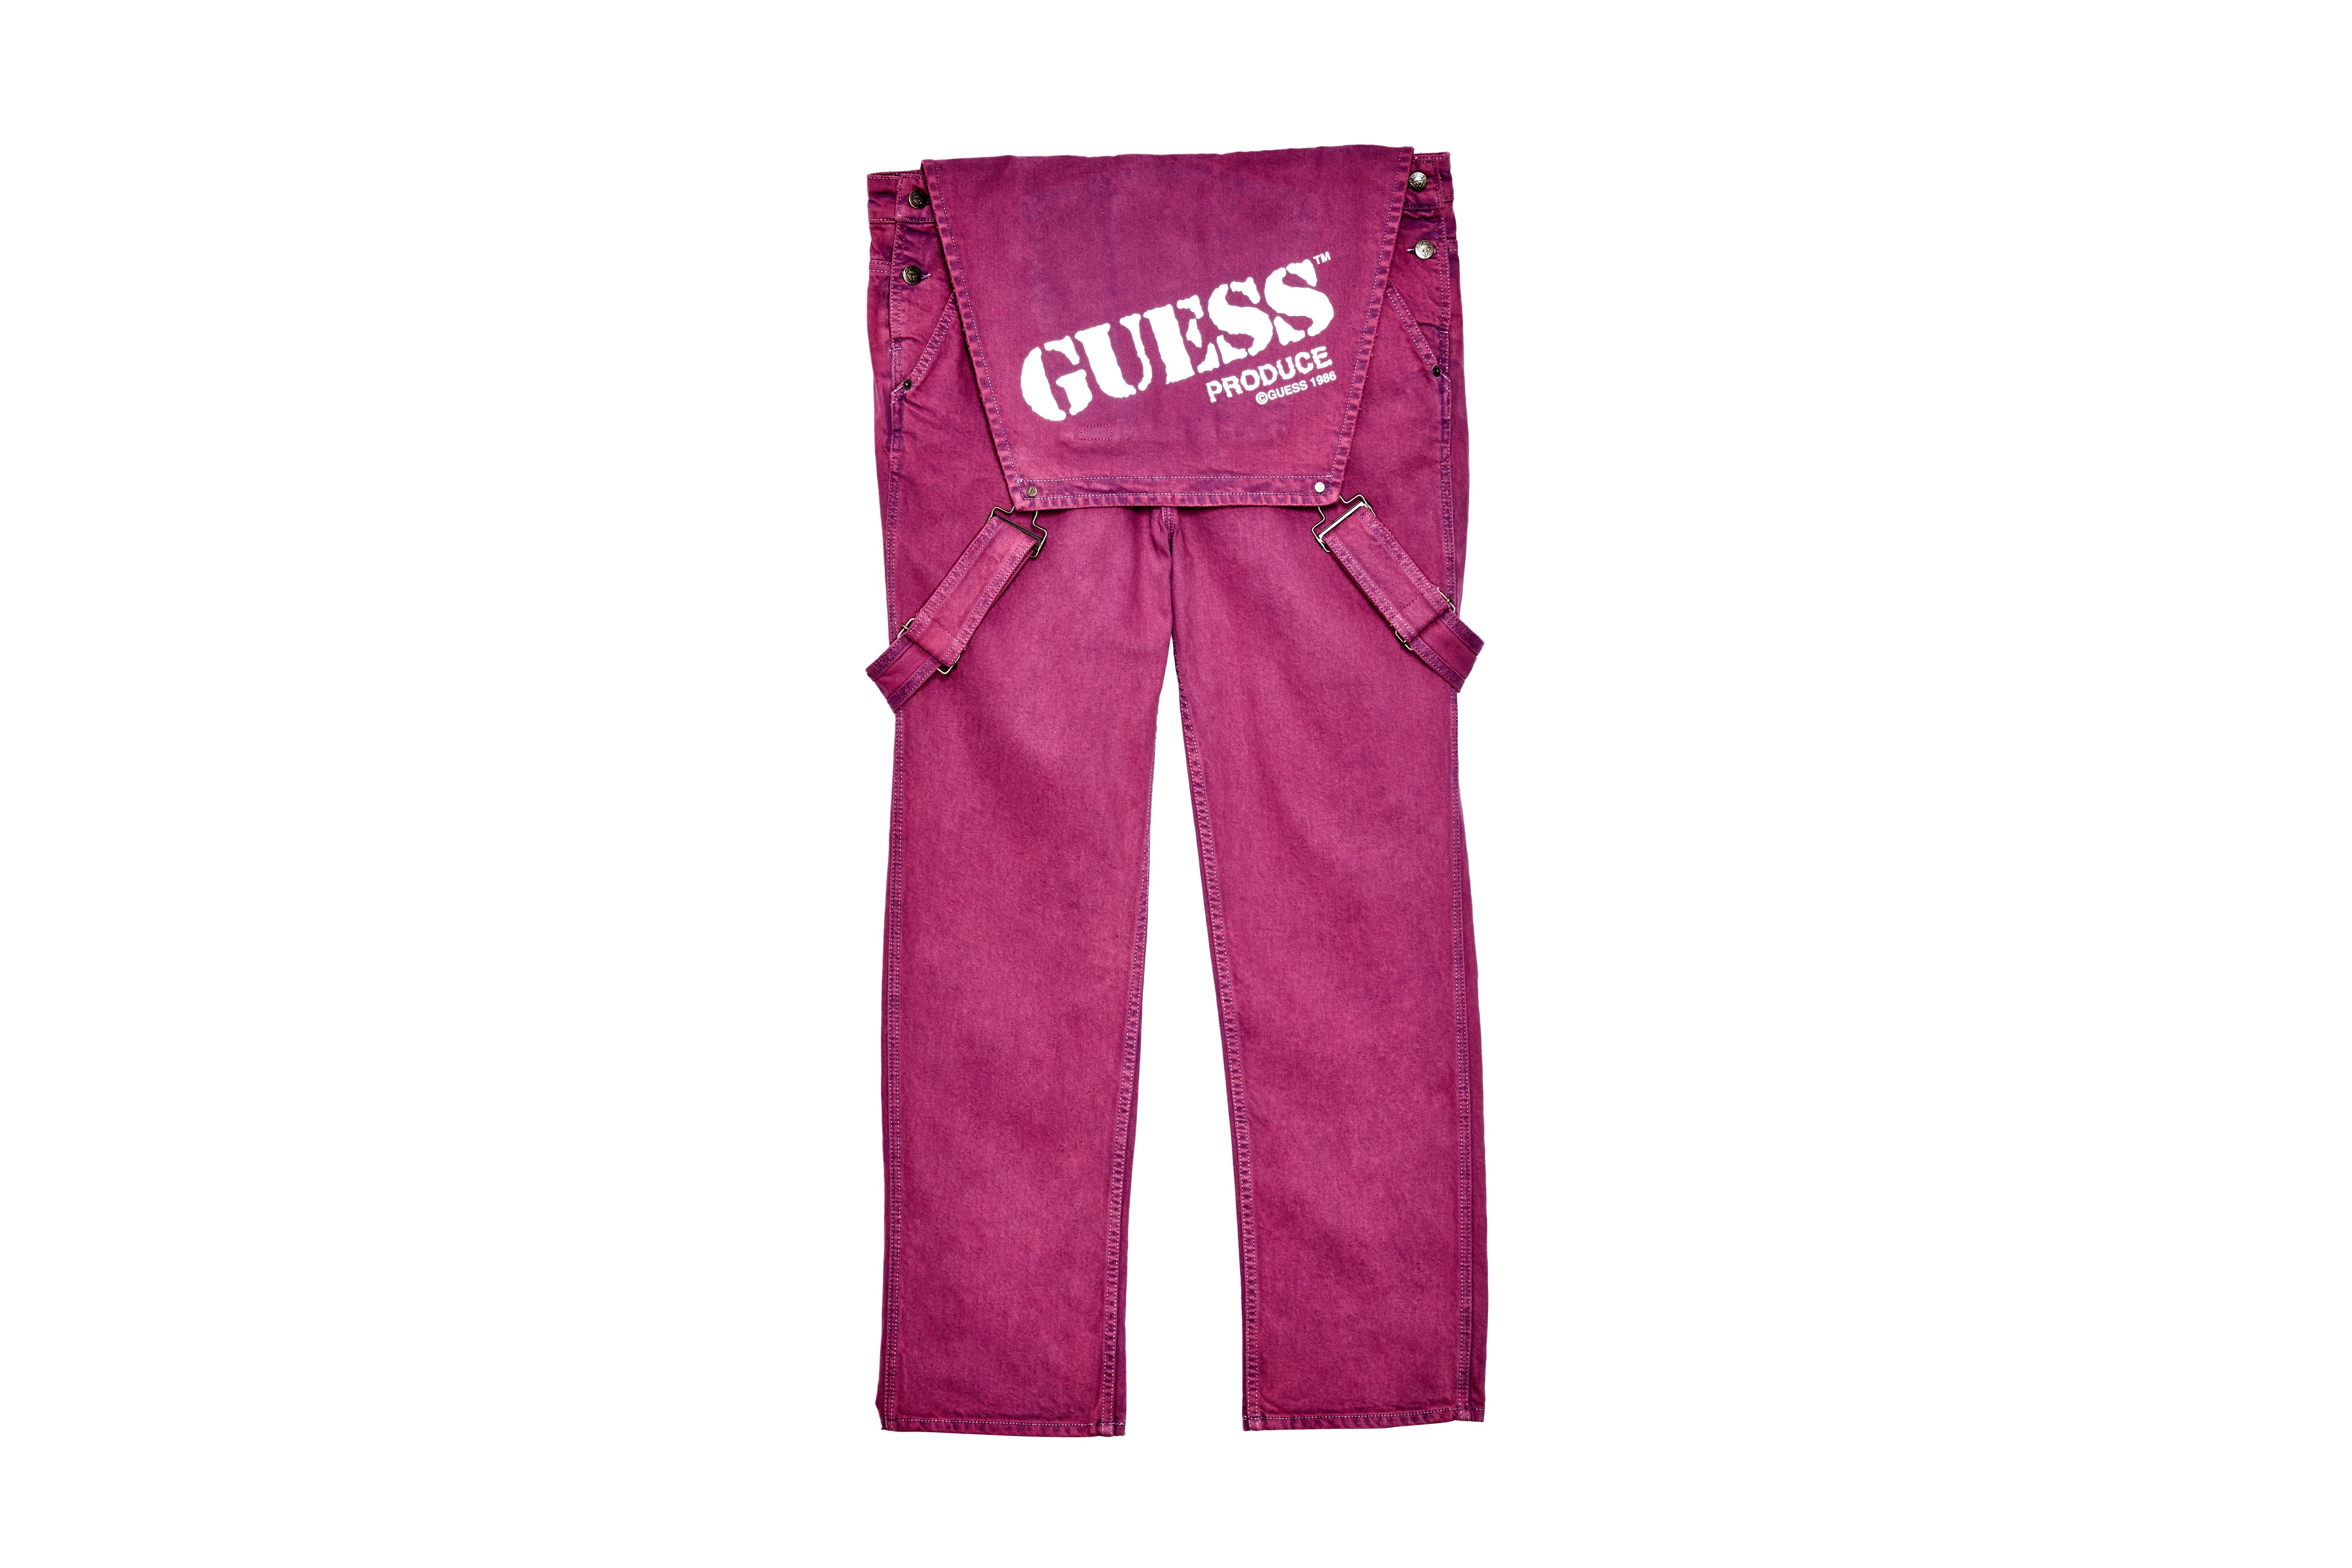 GUESS Jeans USA "Farmers Market" Collection Sean Wotherspoon Vegan Dye Streetwear Fashion Dungarees Overalls T-Shirt Hoodie